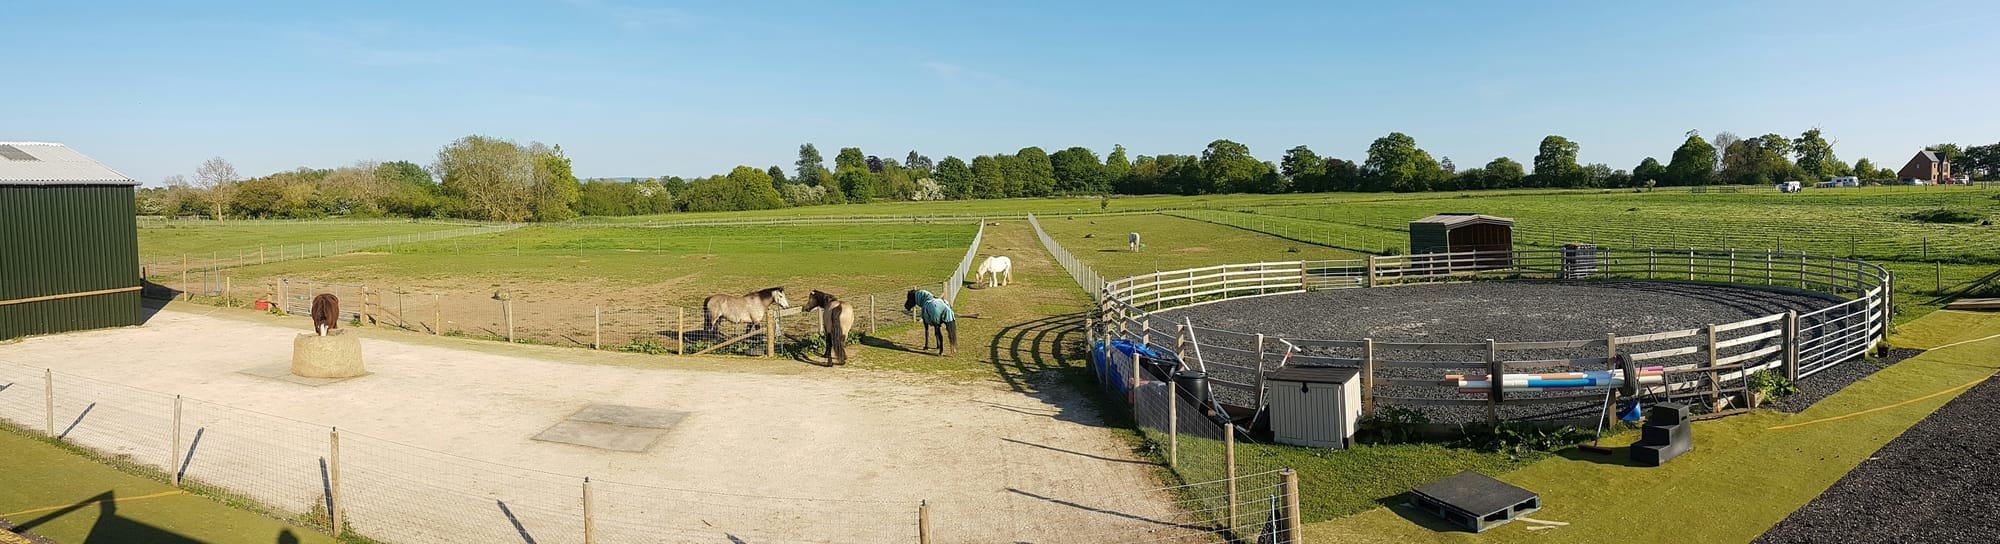 Our round pen and corral